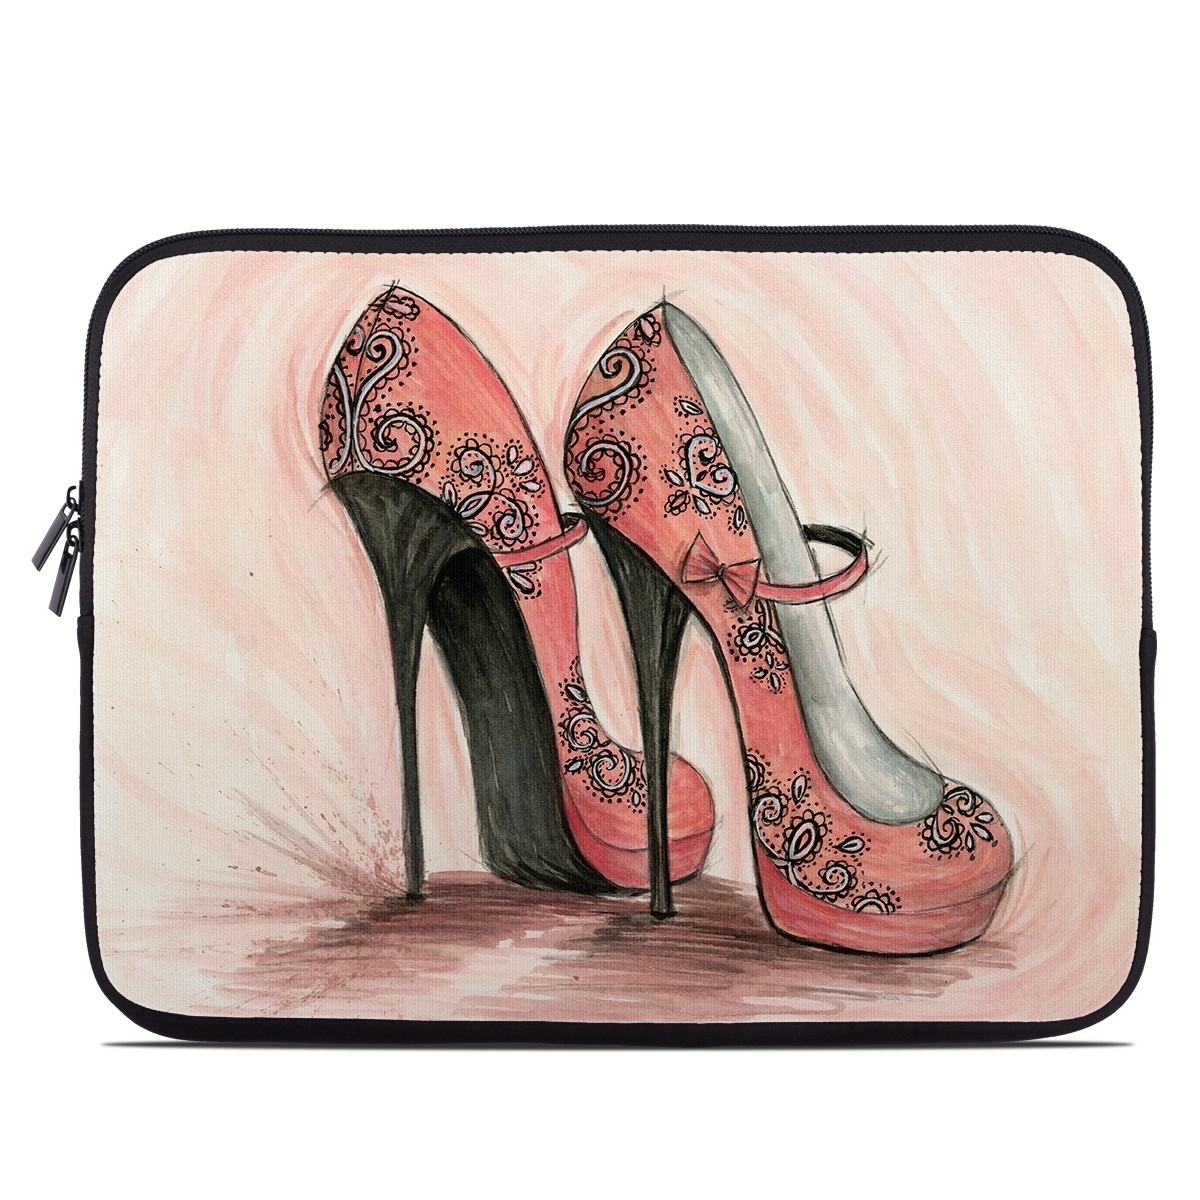 Laptop Sleeve - Coral Shoes (Image 1)